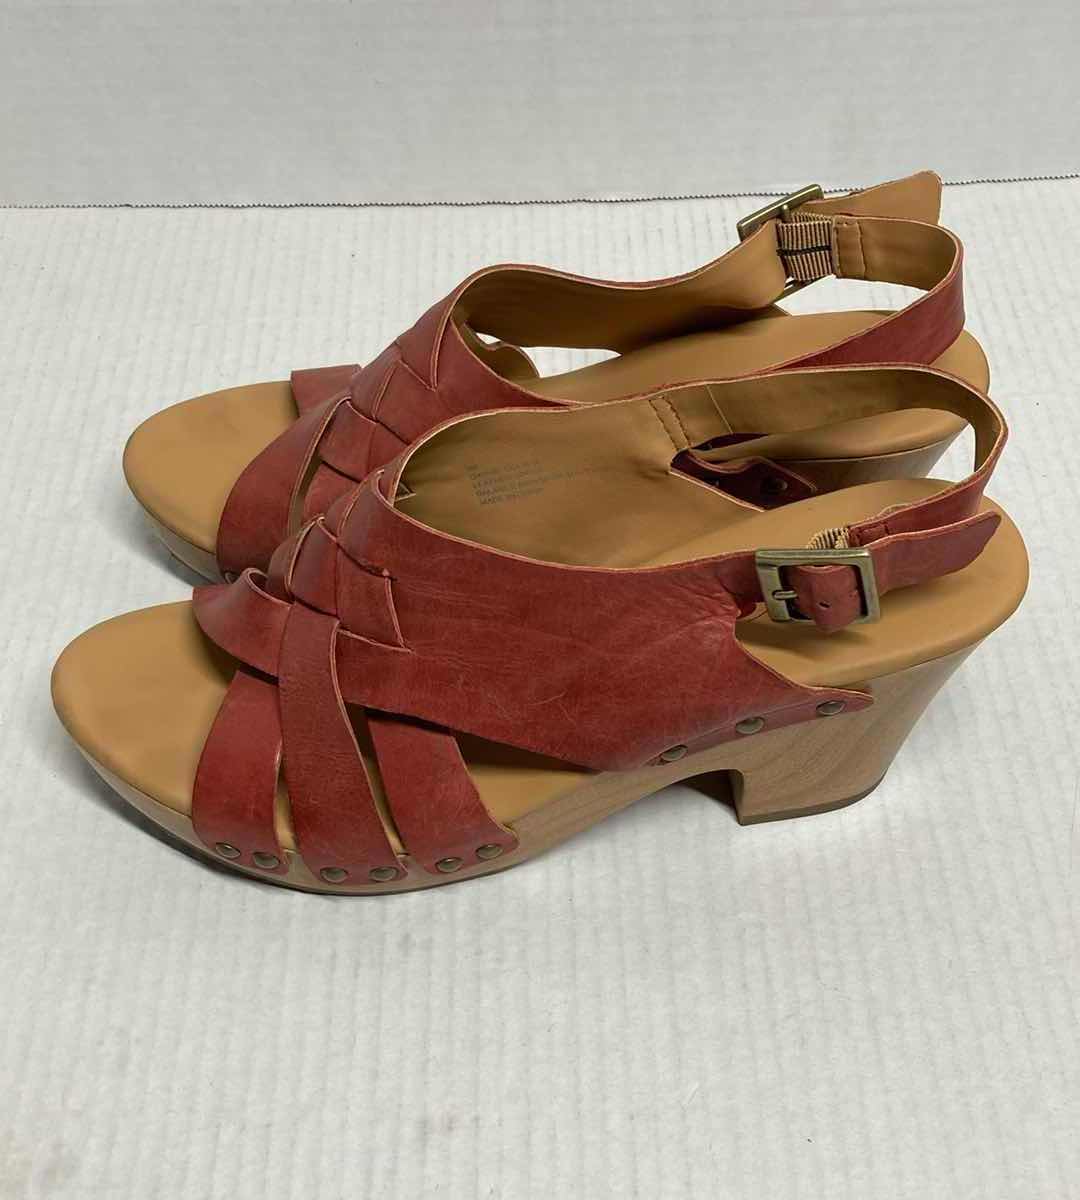 Photo 3 of KORKS BERENGO RED LEATHER BLOCK HEEL SANDALS WOMAN’S SIZE 9M